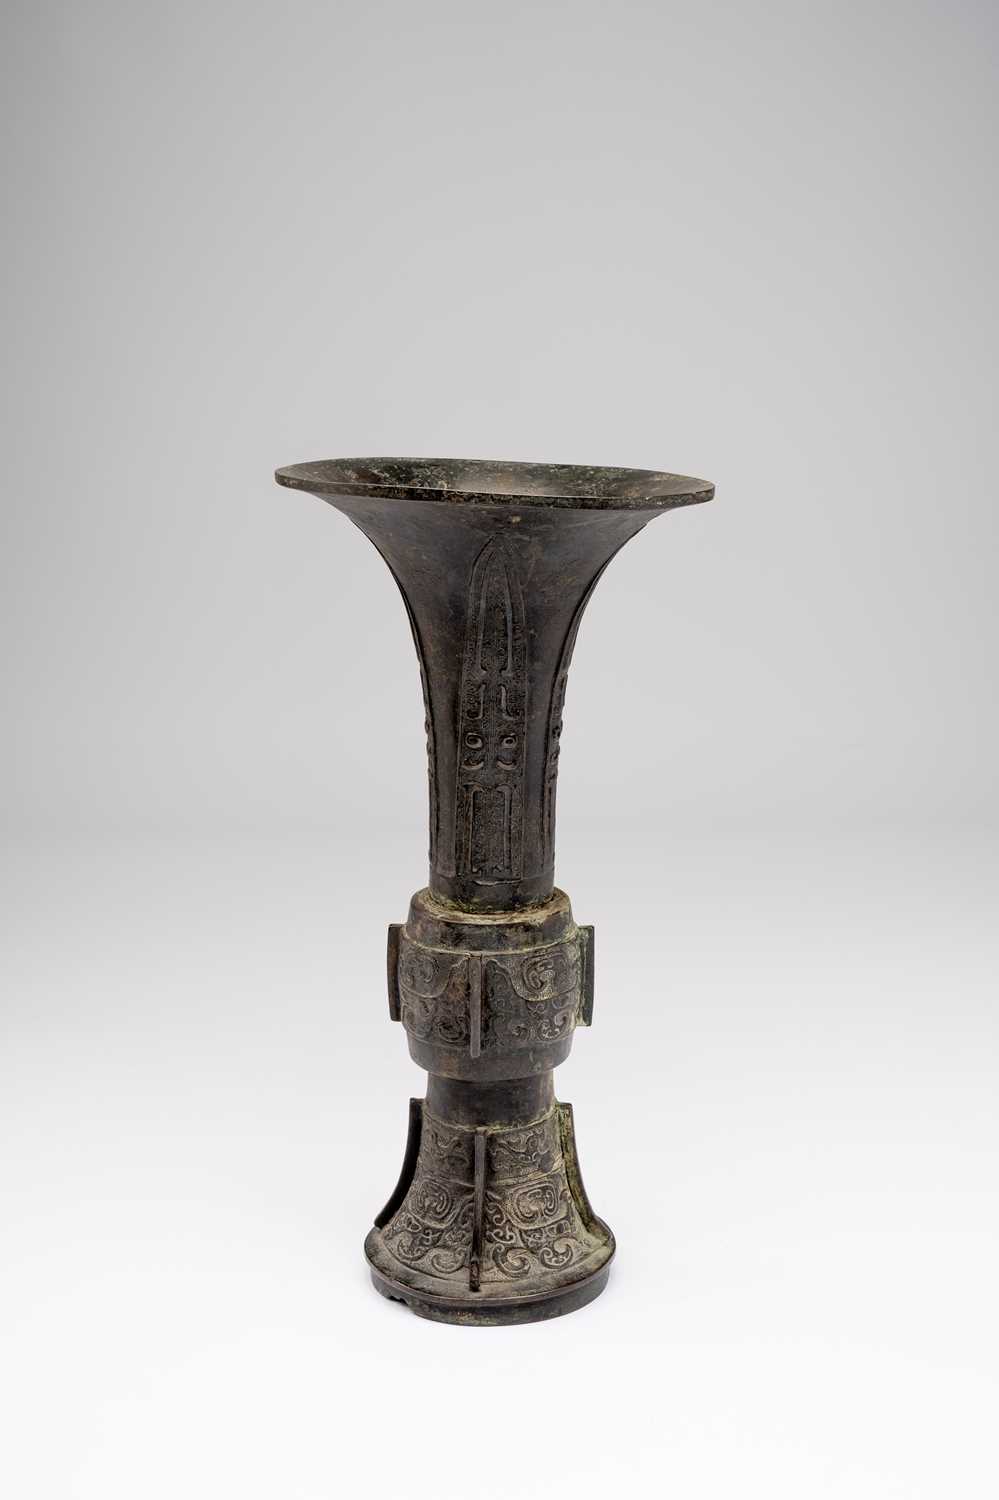 A CHINESE BRONZE ARCHAISTIC GU-SHAPE VASE17TH CENTURYThe central section and base cast with taotie